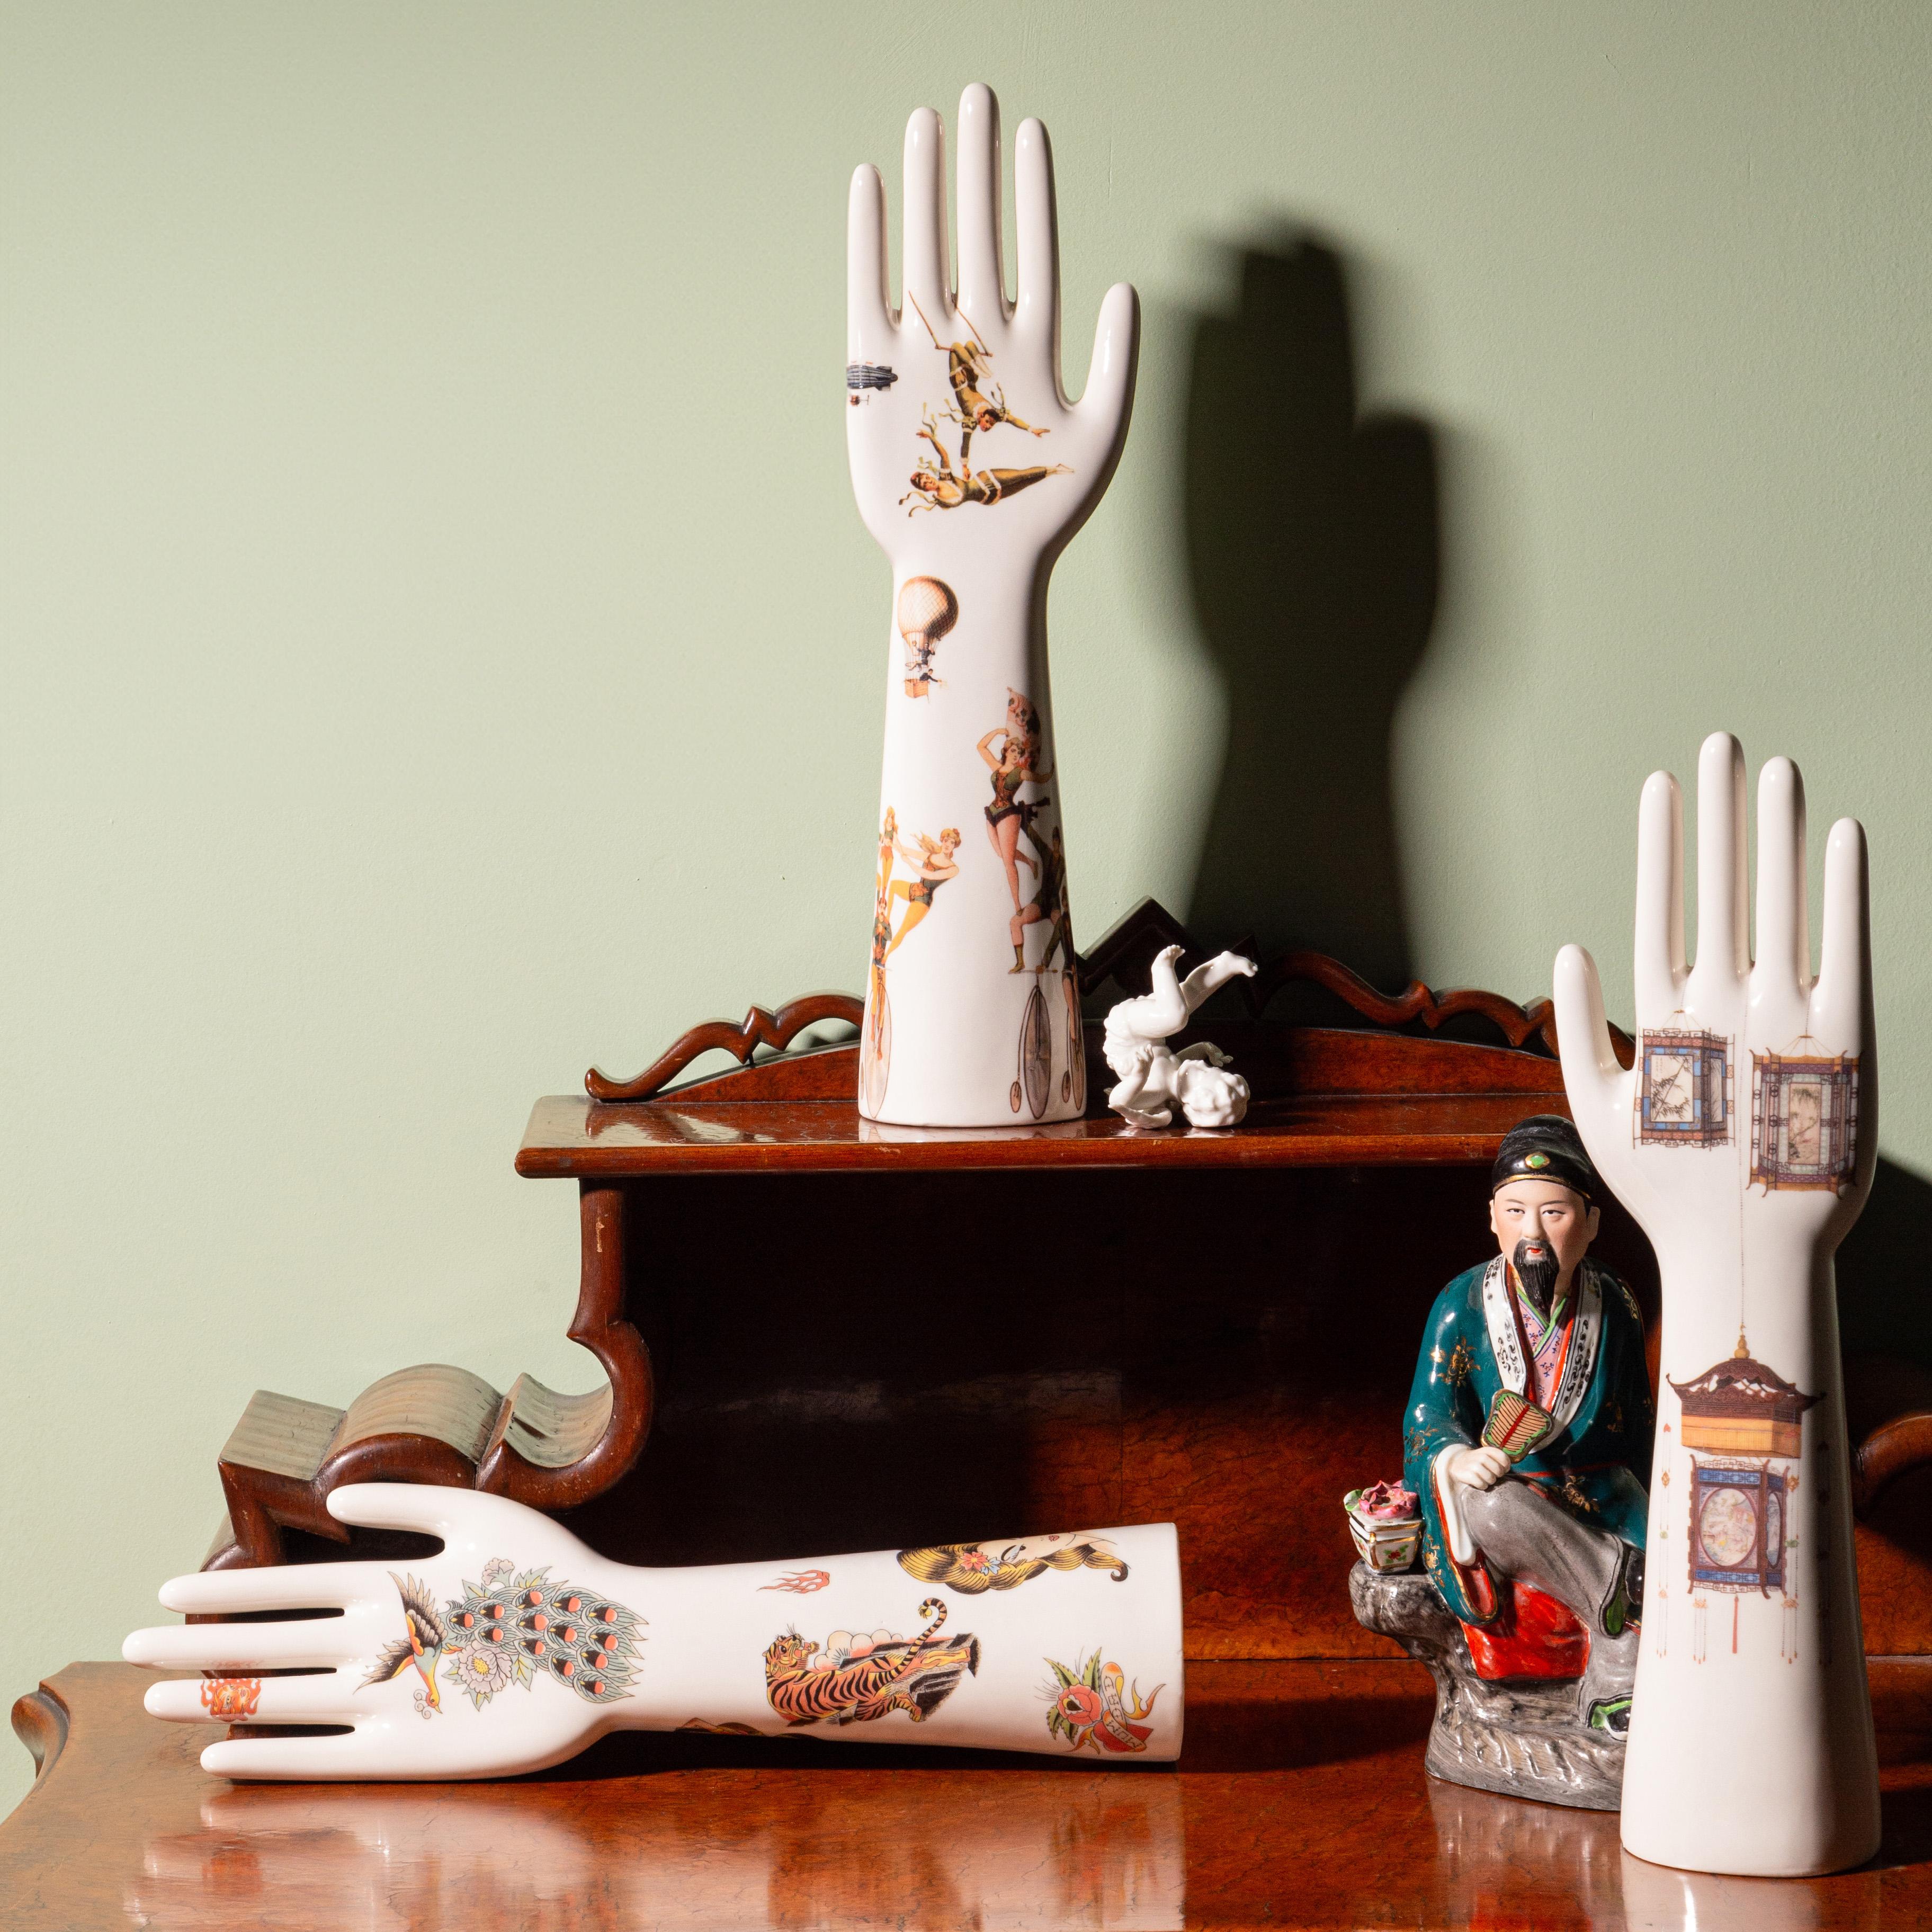 Contemporary Anatomica, Porcelain Hand with Chinese Lanterns Decoration by Vito Nesta For Sale